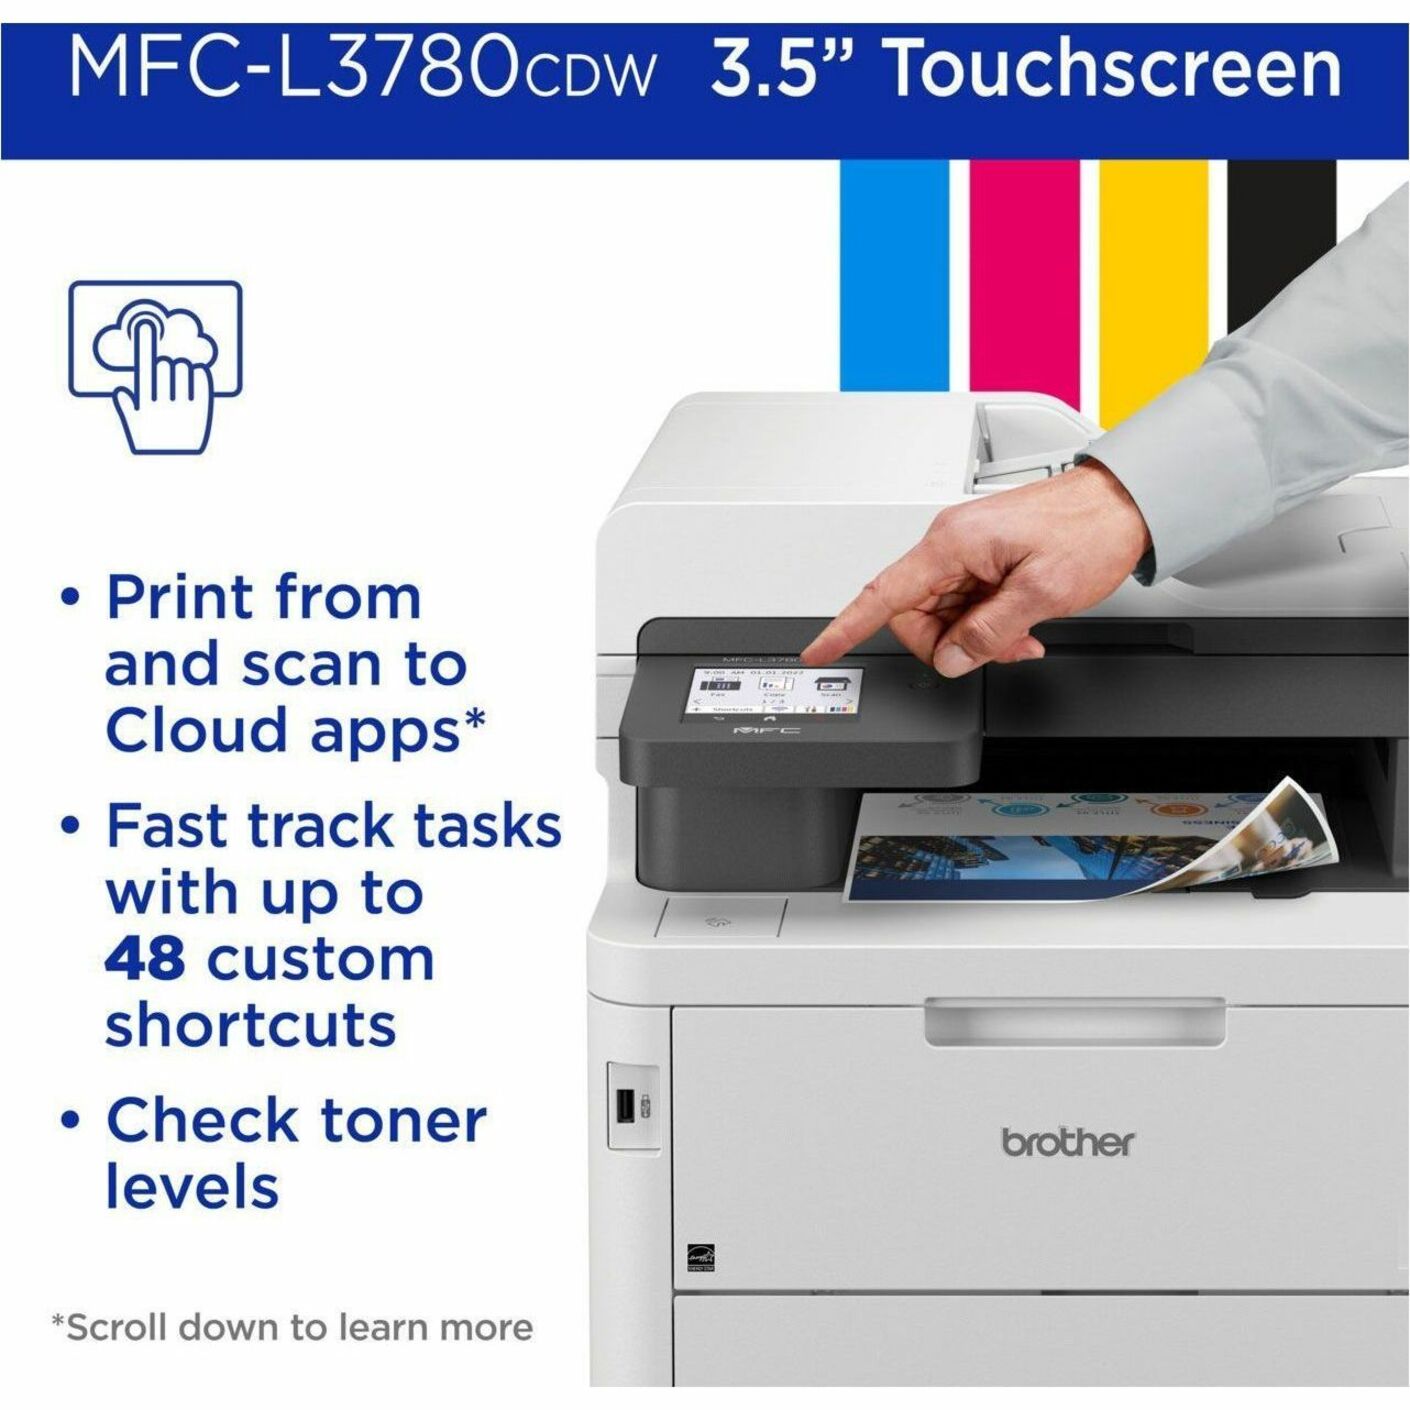 Brother MFC-L3780CDW Wireless Digital Color All-in-One Printer, Fax, Copier, Scanner, USB, 3.50" Touchscreen, Gigabit Ethernet, Wireless LAN, NFC